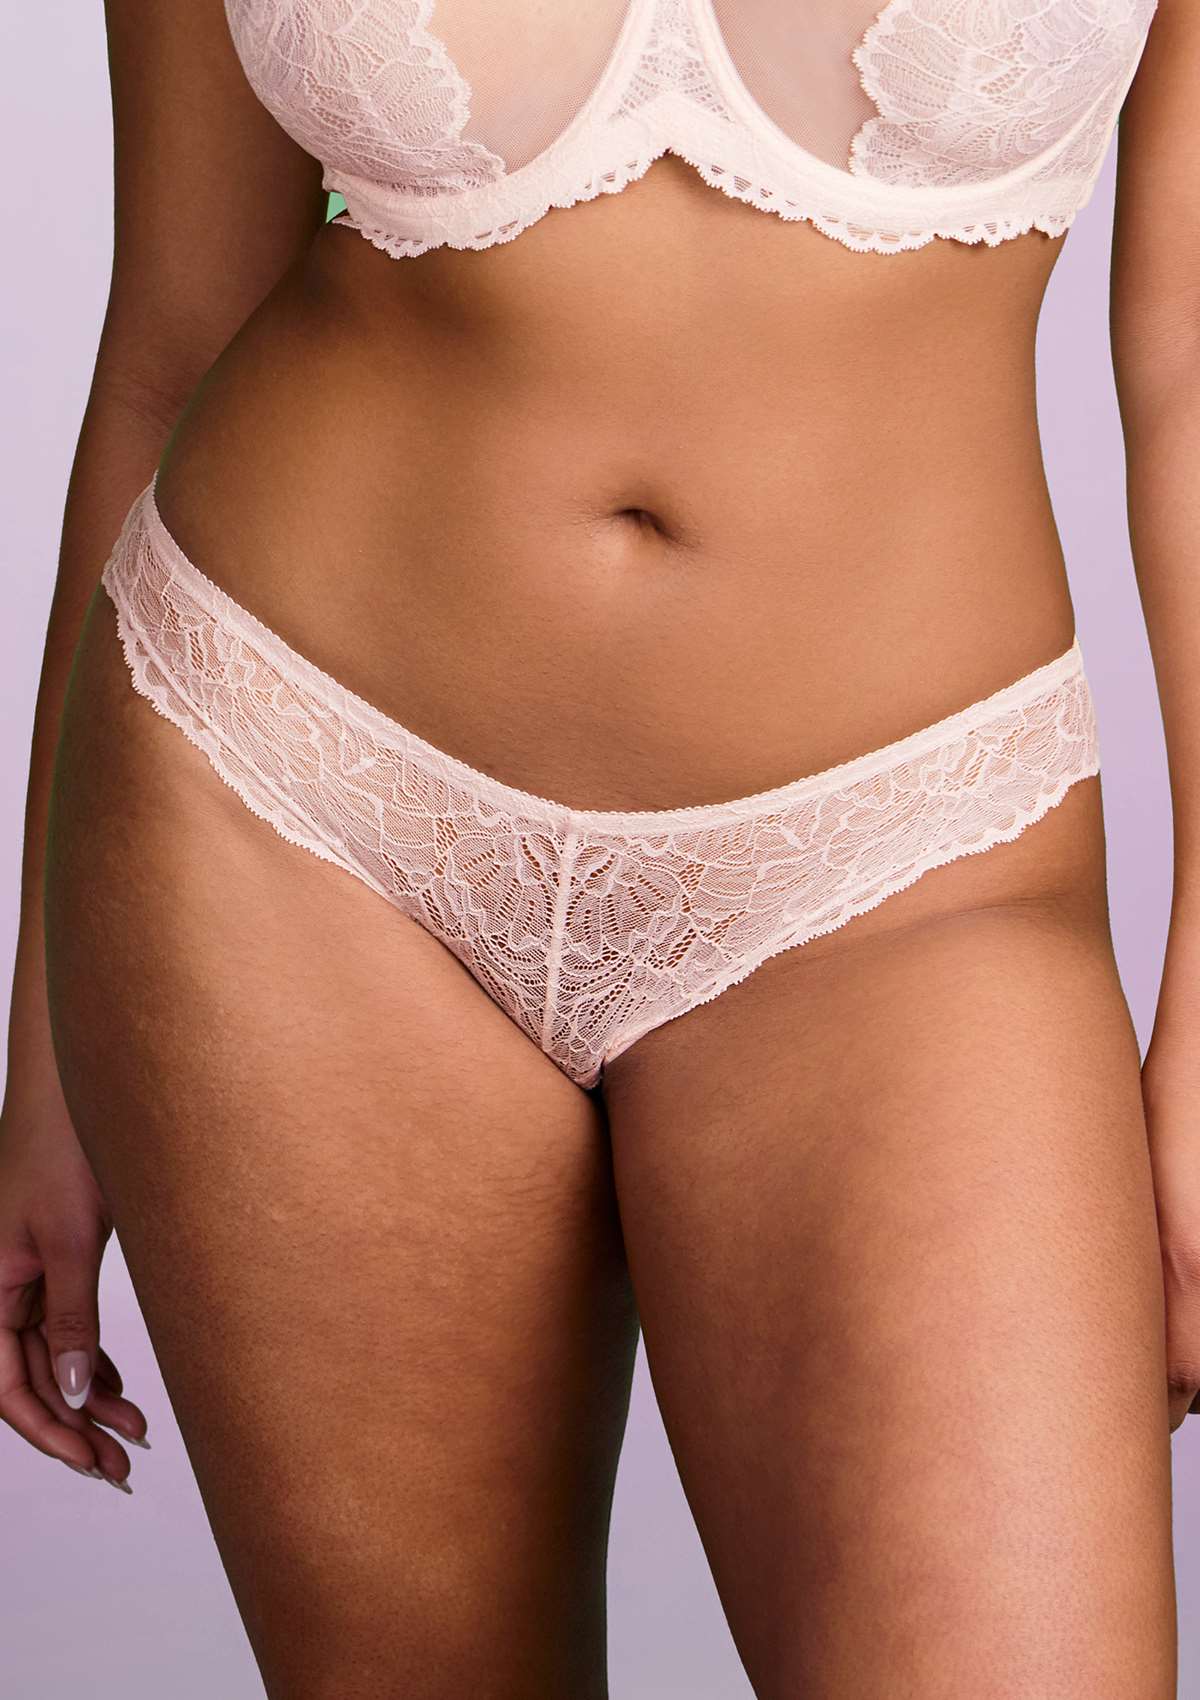 HSIA Blossom Mid-Rise Sheer Lace Lightweight Charming Feminine Pantie - L / Dusty Peach / High-Rise Brief